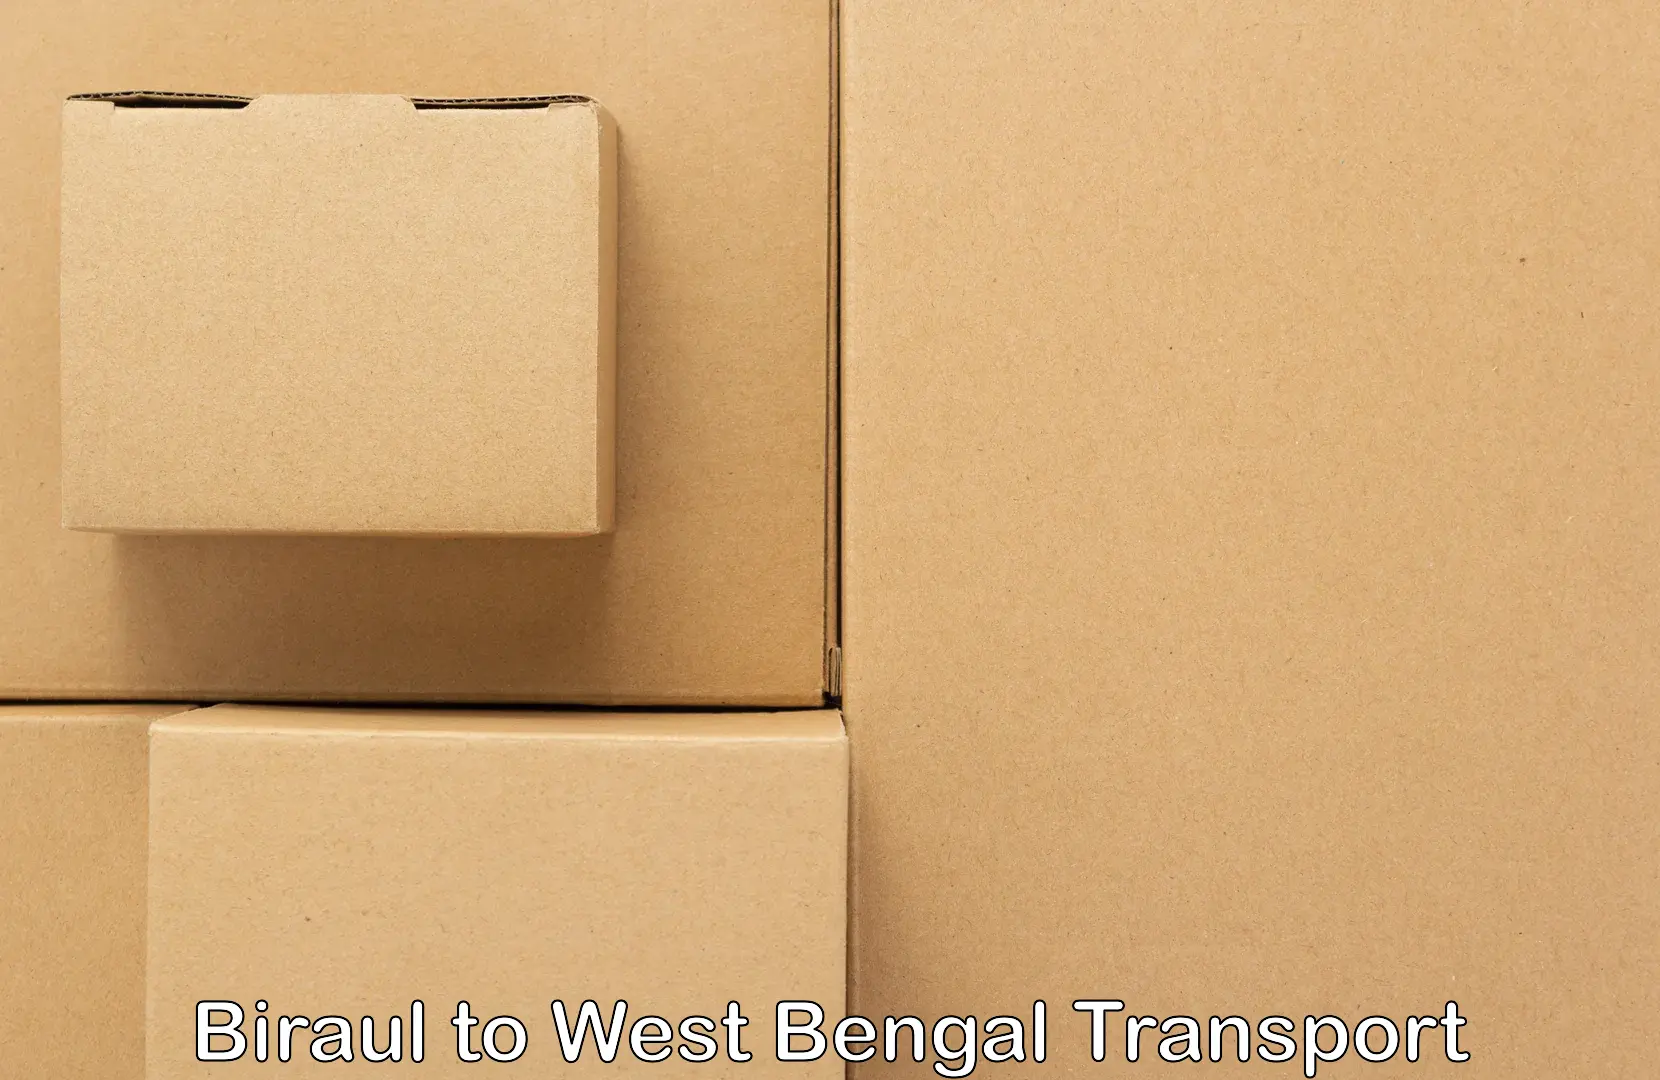 Air freight transport services in Biraul to Gopiballabpur